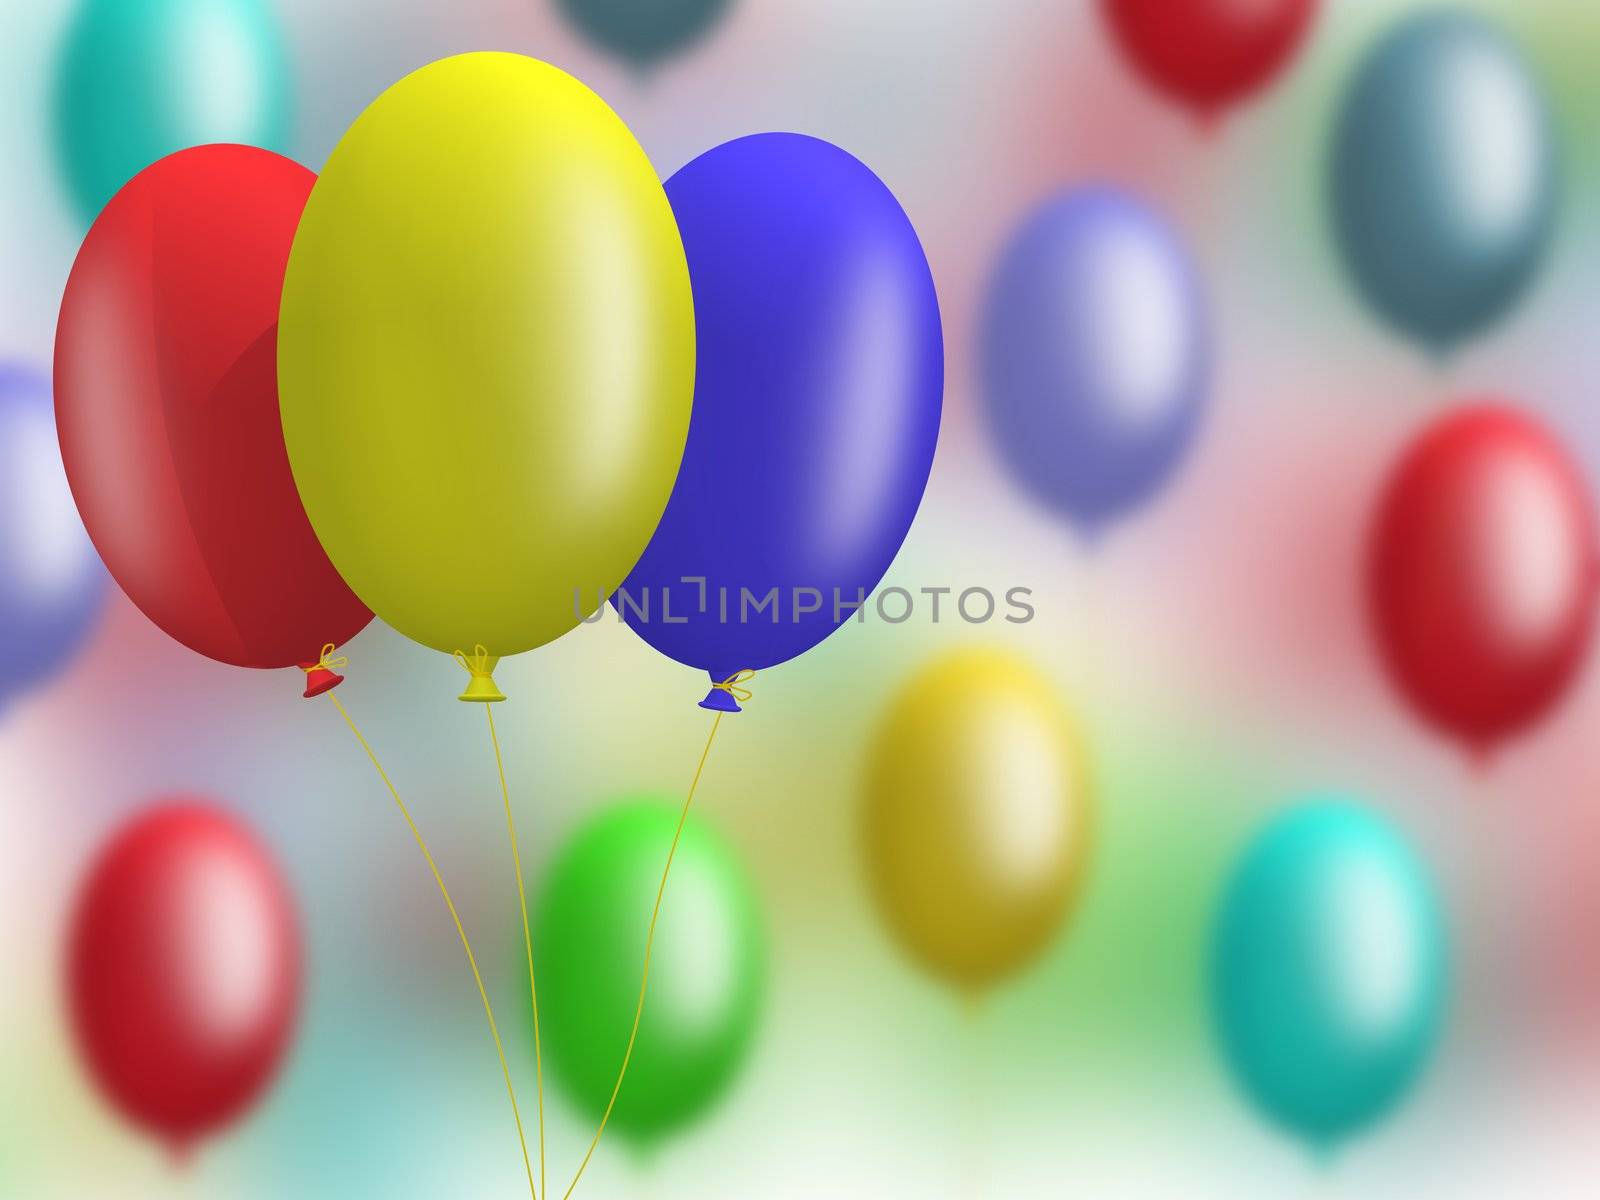 Balloons by galdzer